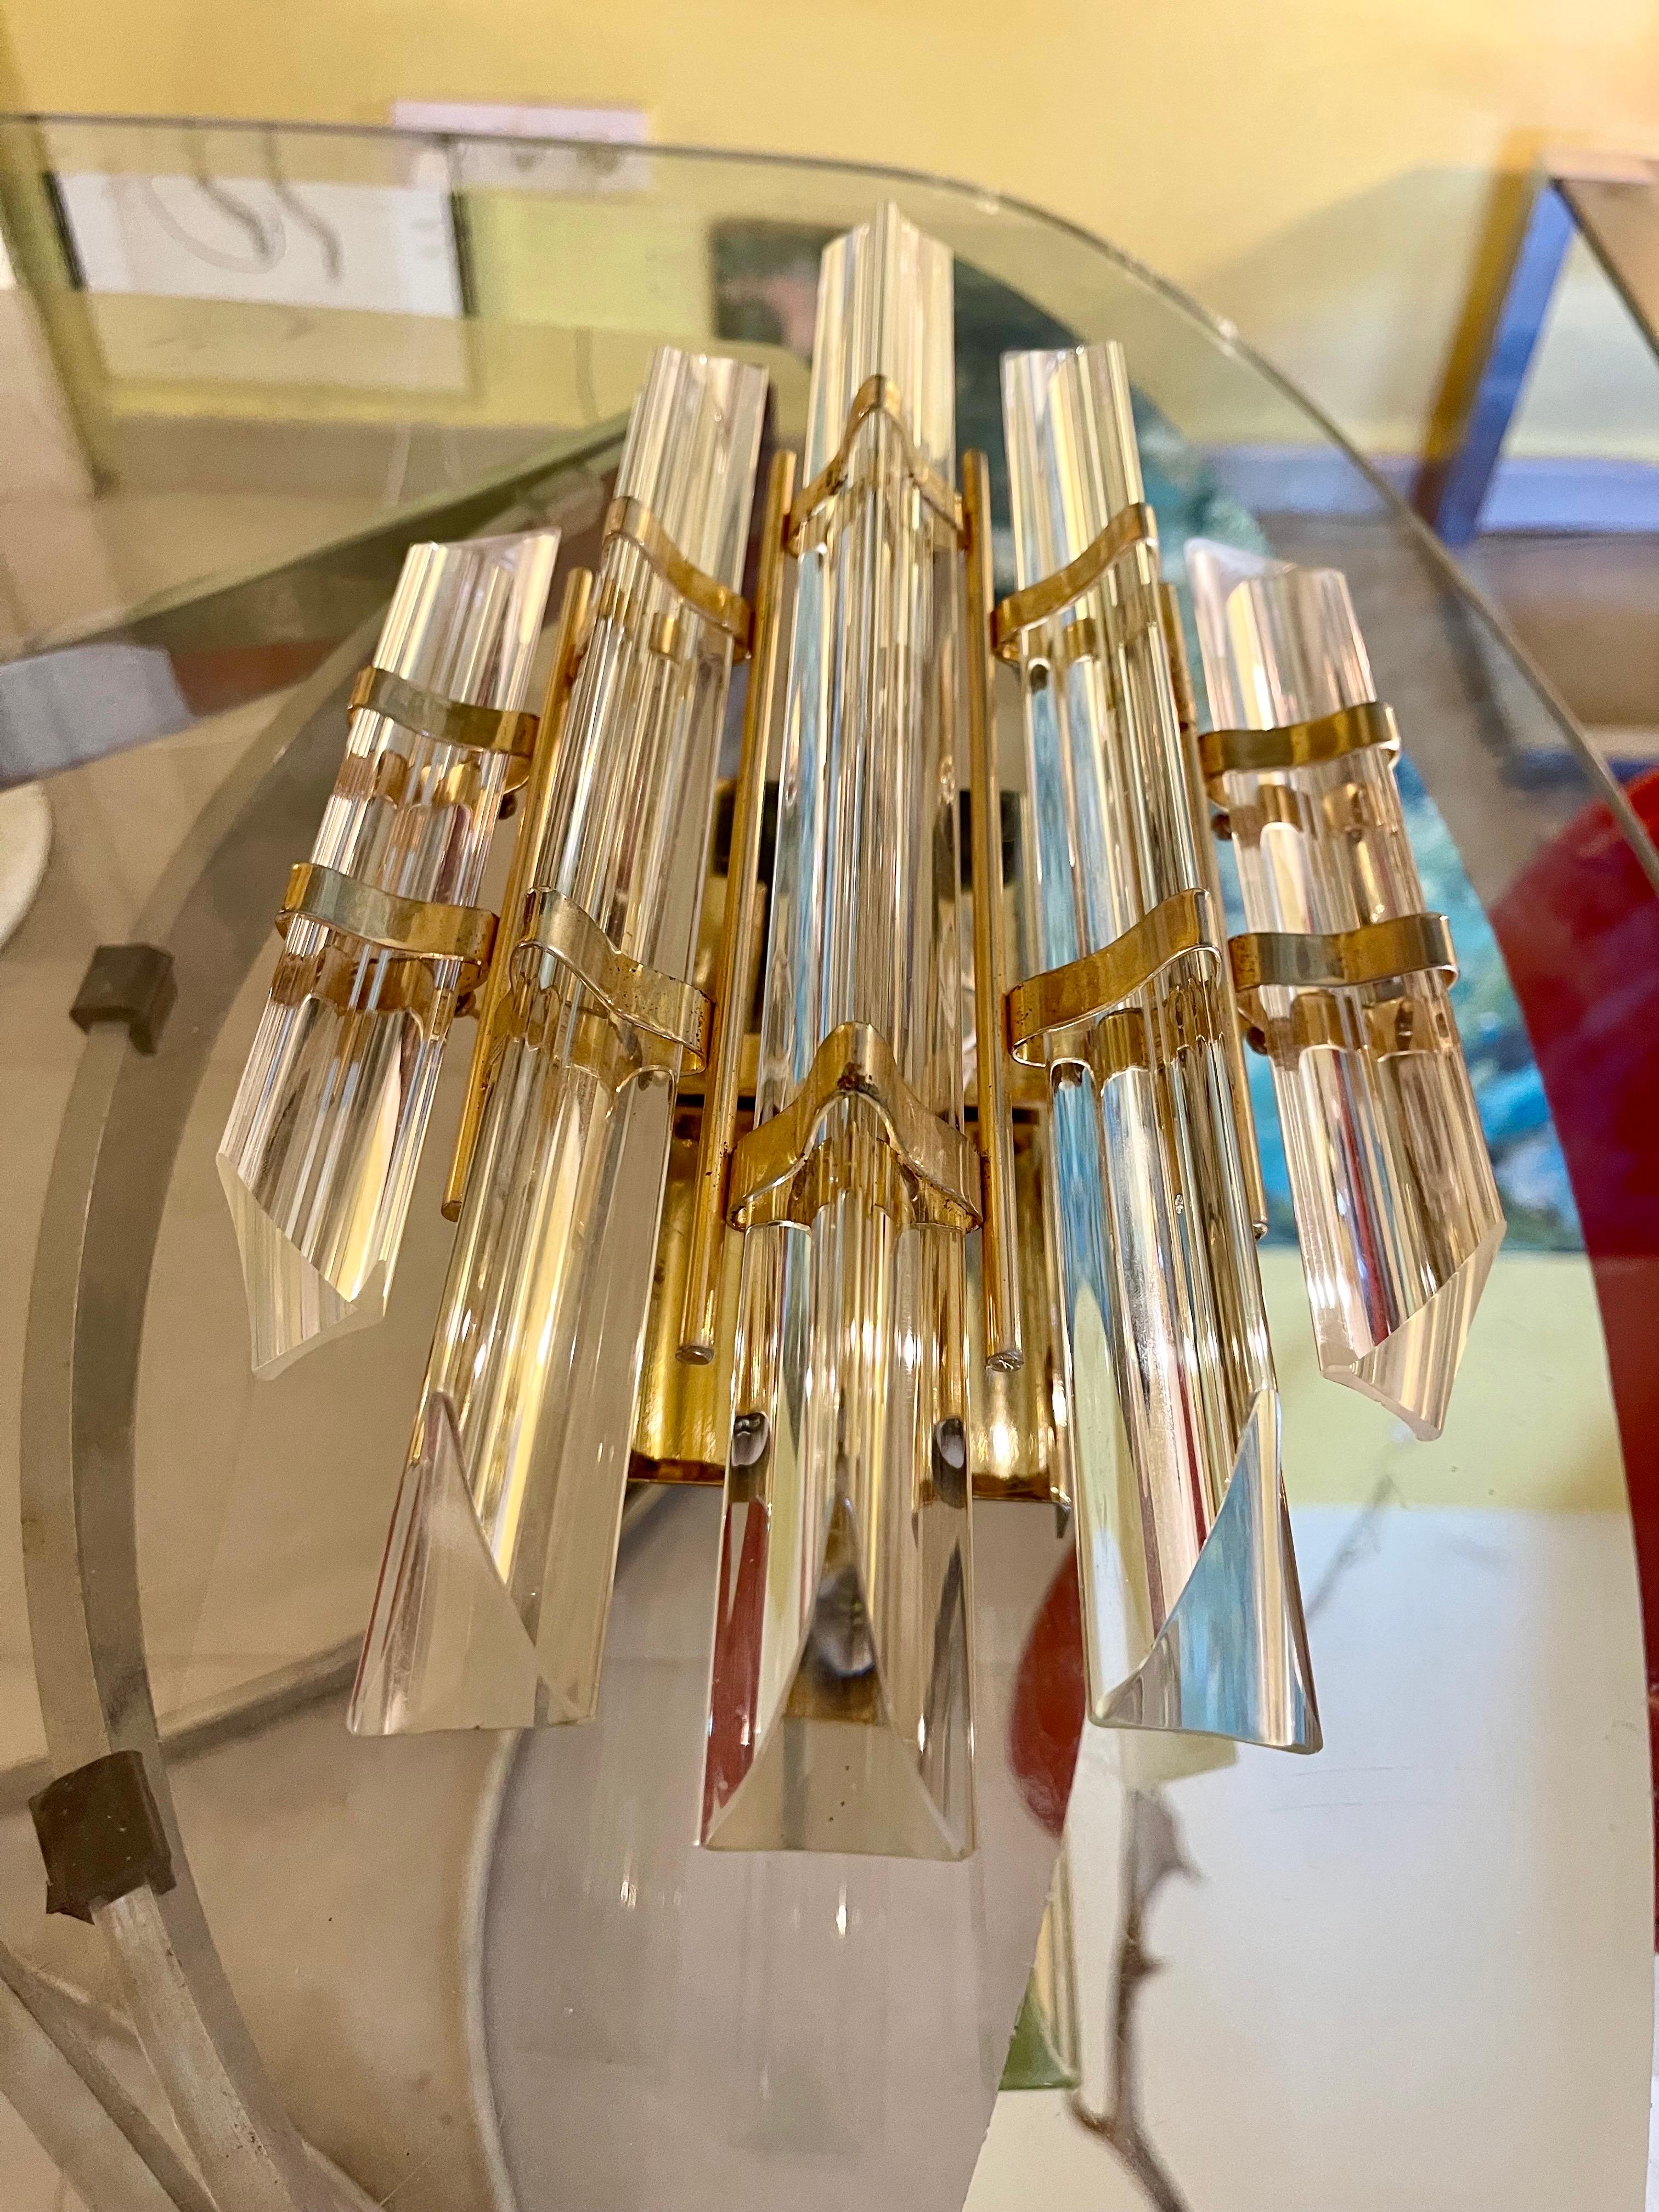 Venini wall lighting murano glass with in iridium glass. The design and the quality of the glass make this piece the best of the design.
This wall lighting pair are in good condition.

PLEASE check Picture a little different in the structure 
Size